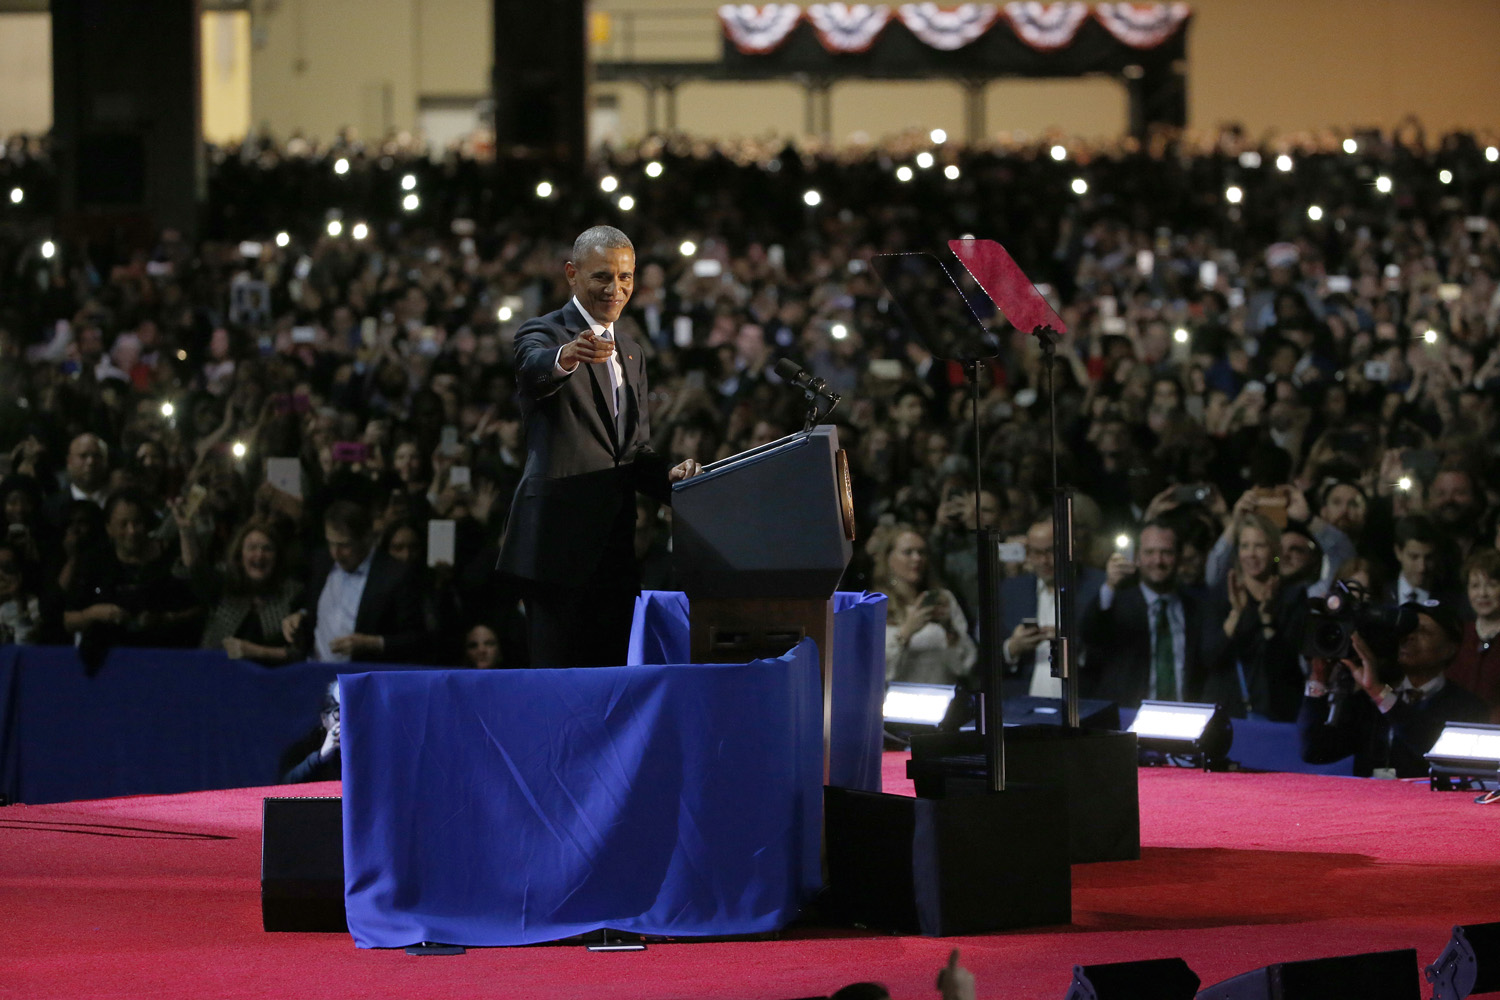 President Barack Obama speaks at McCormick Place in Chicago, Tuesday, Jan. 10, 2017, giving his presidential farewell address. (Nam Y. Huh/AP)